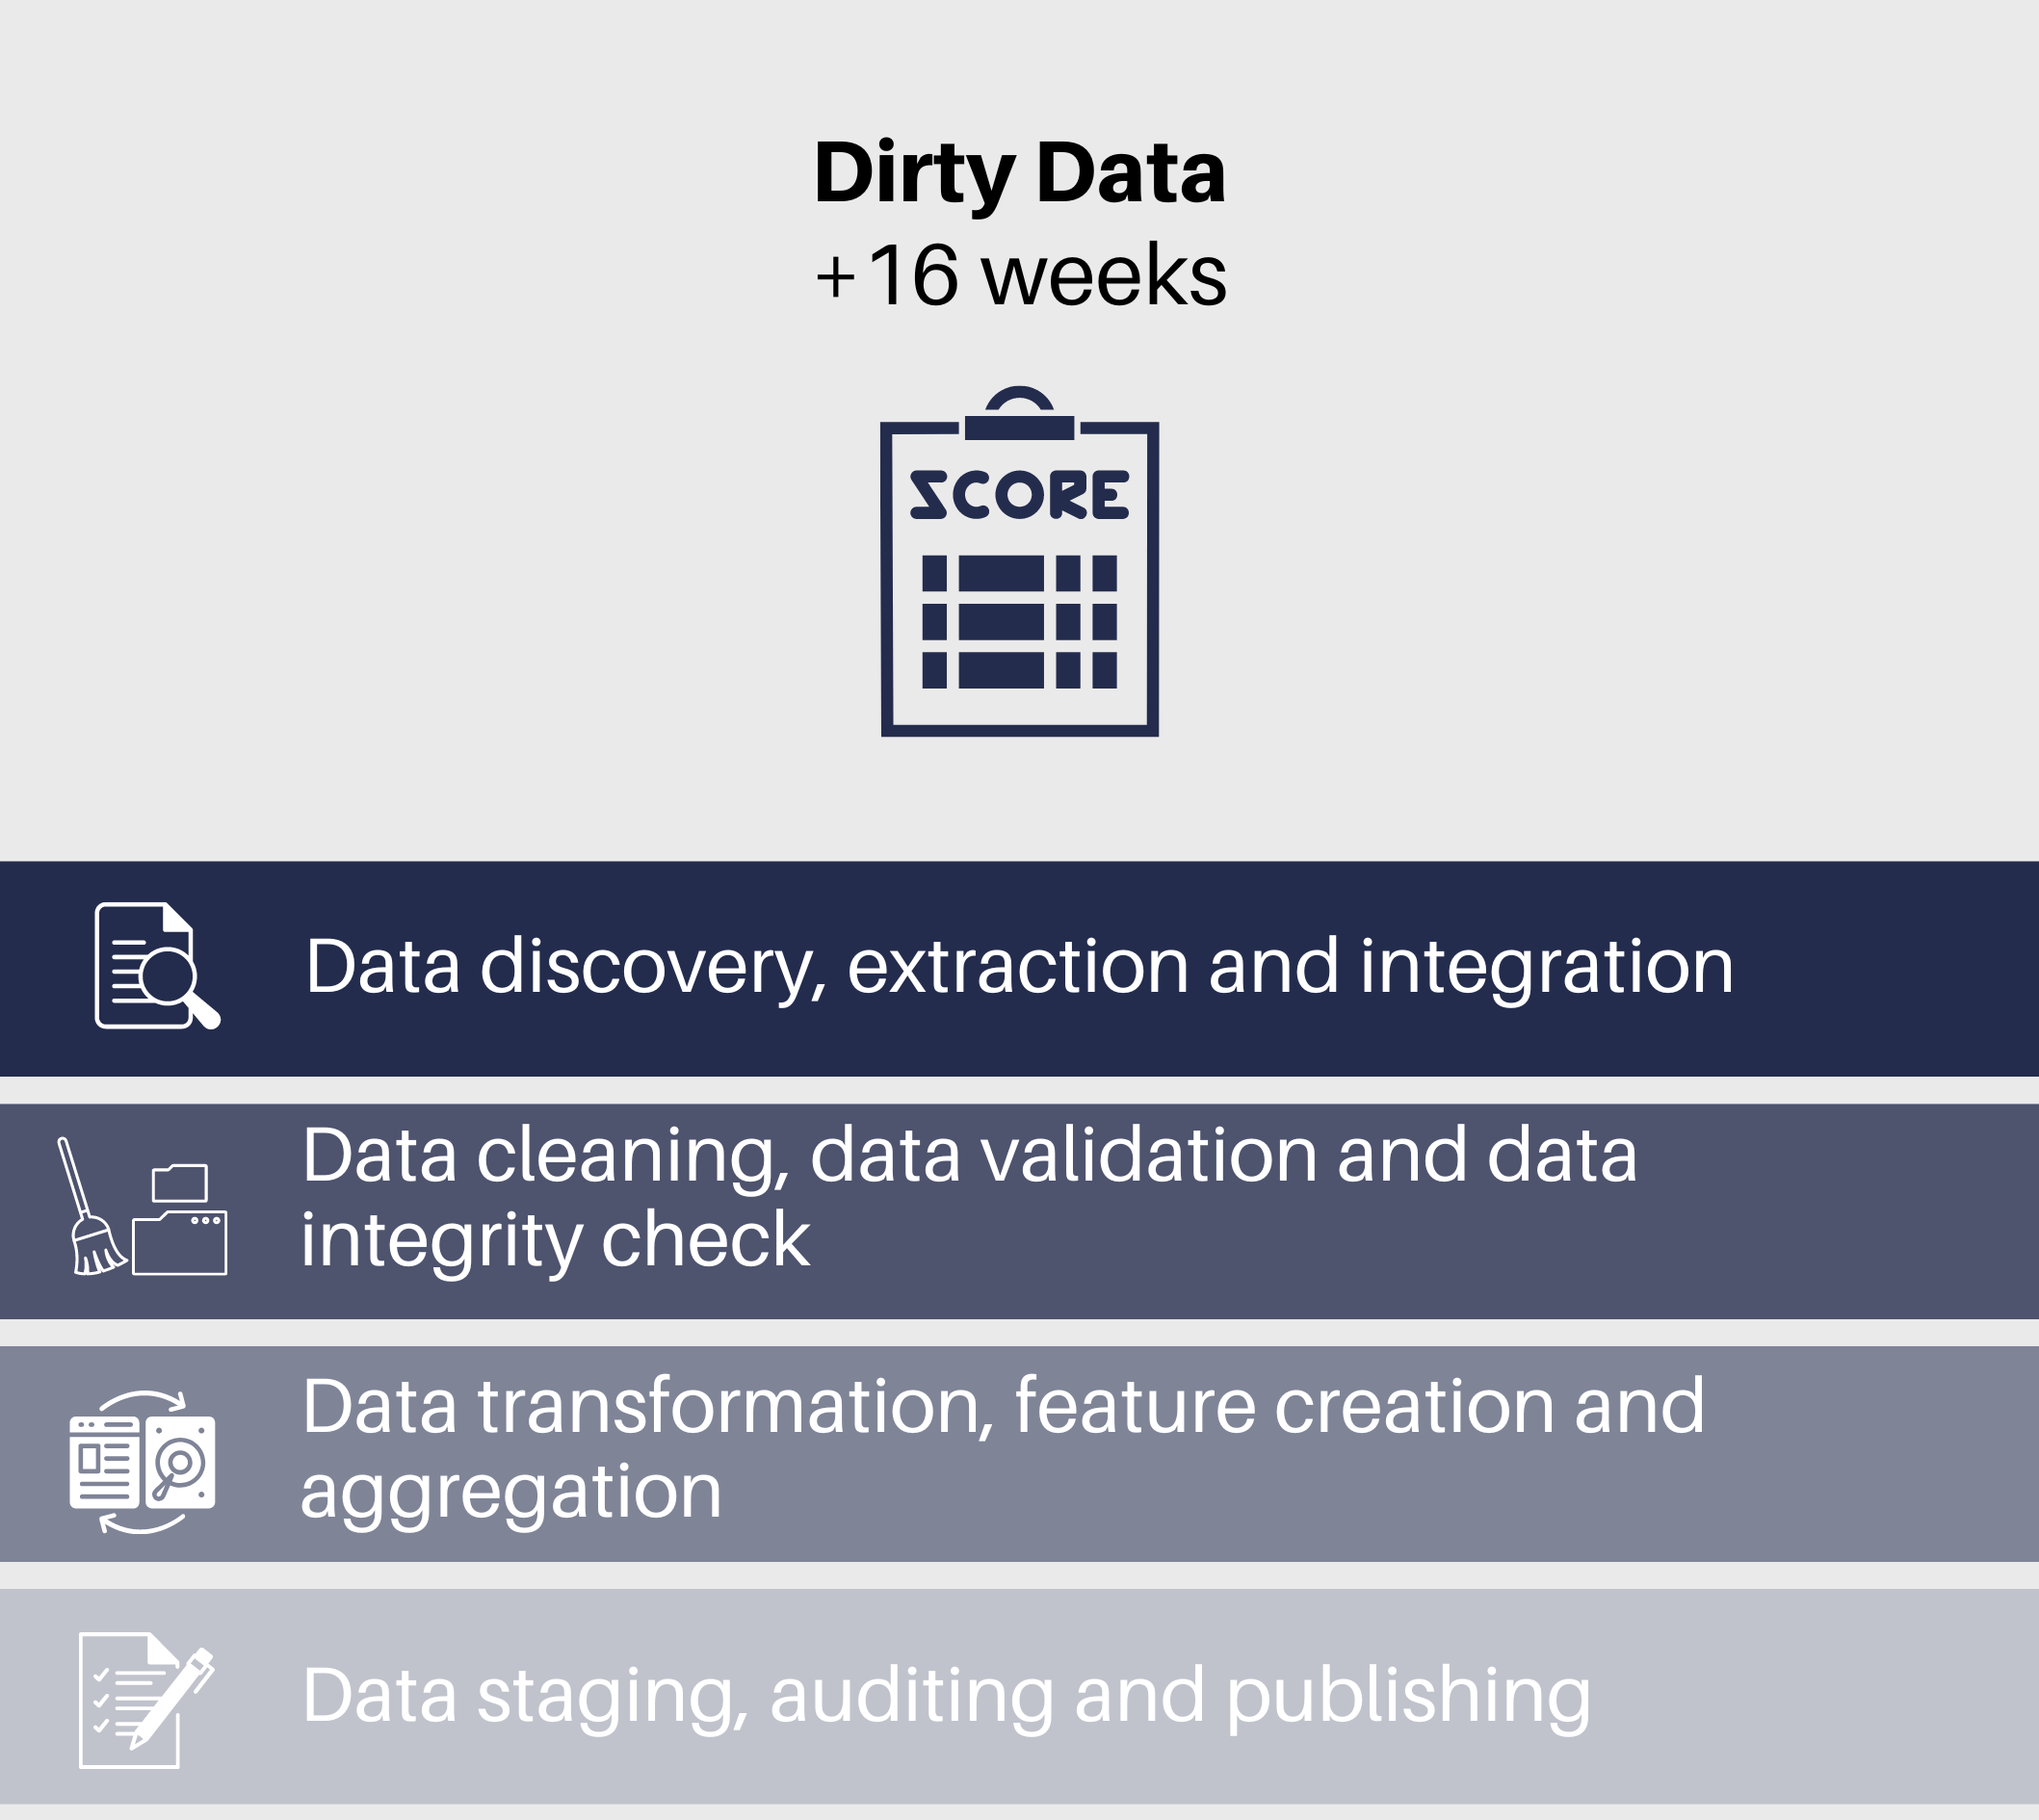 OLSPS Analytics Scorecard Solution Dirty Data - The OLSPS Scorecard Solution requires a minimum of 3 years worth of historic data, in order to maximize both the accuracy and robustness of the model.